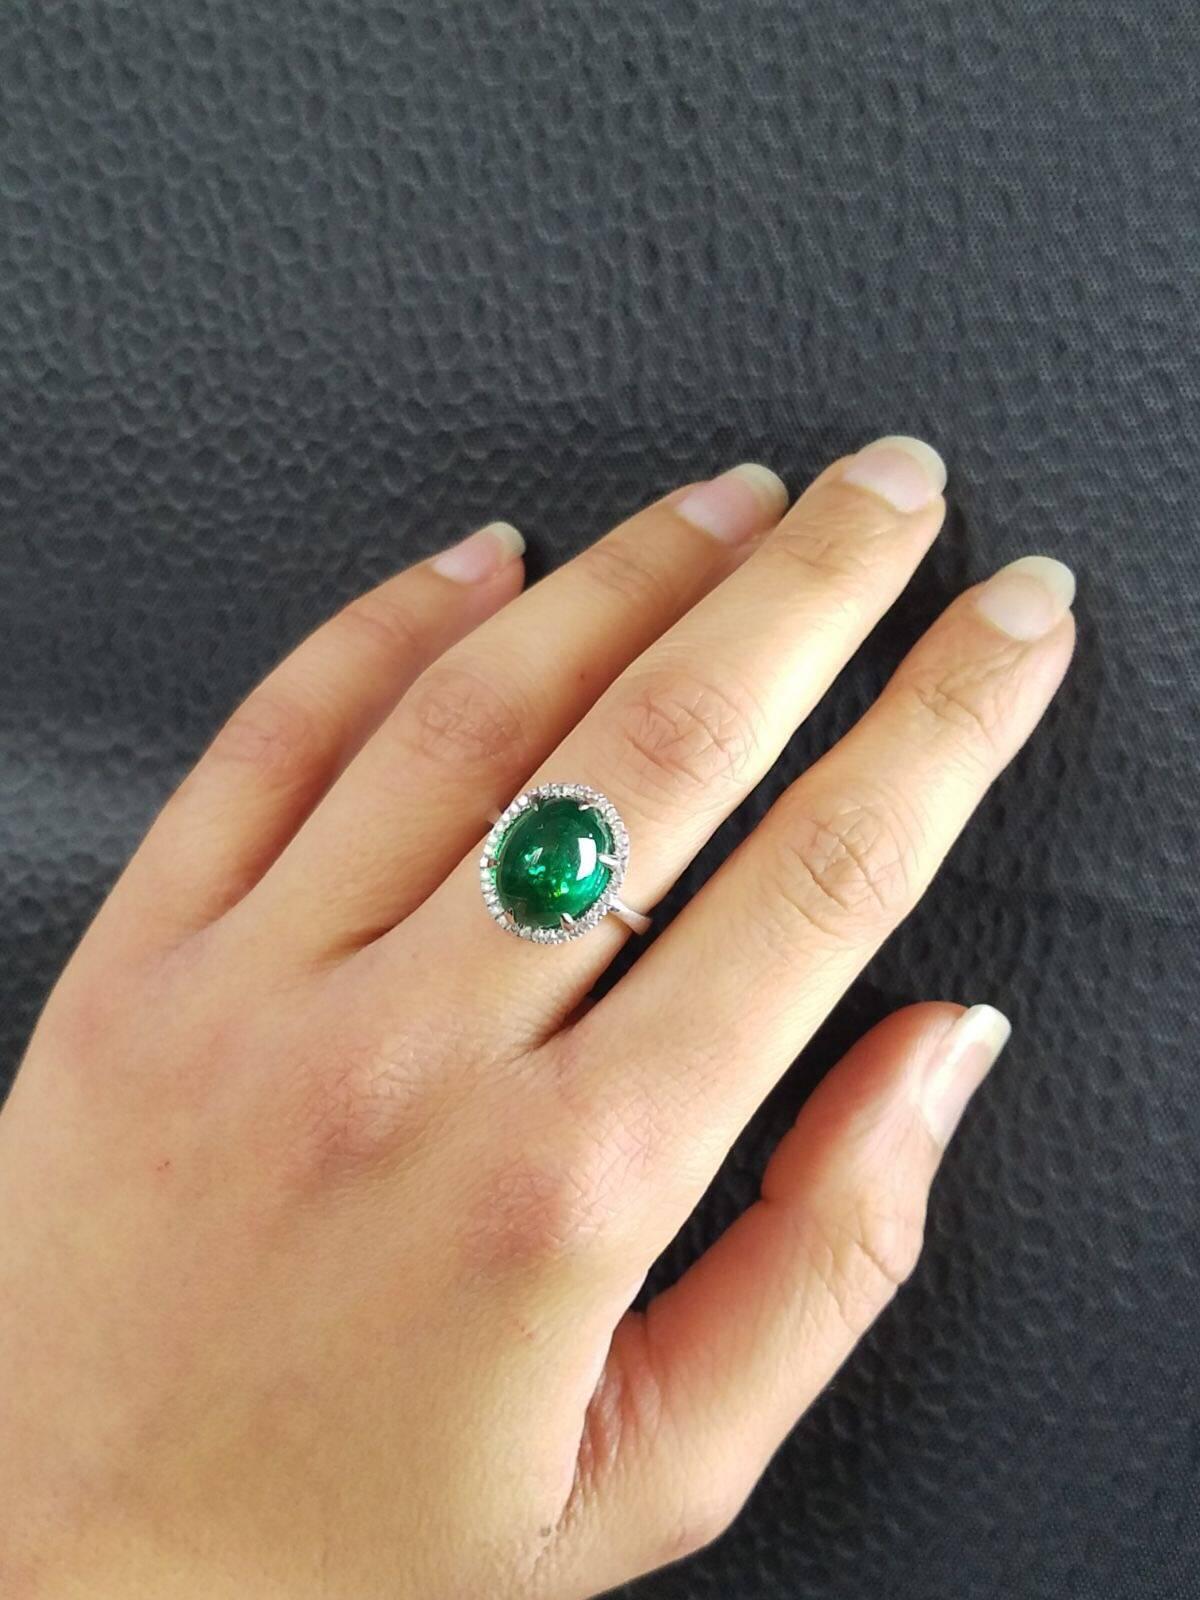 Oval Cut 7.46 Carat Cabochon Emerald and Diamond Ring